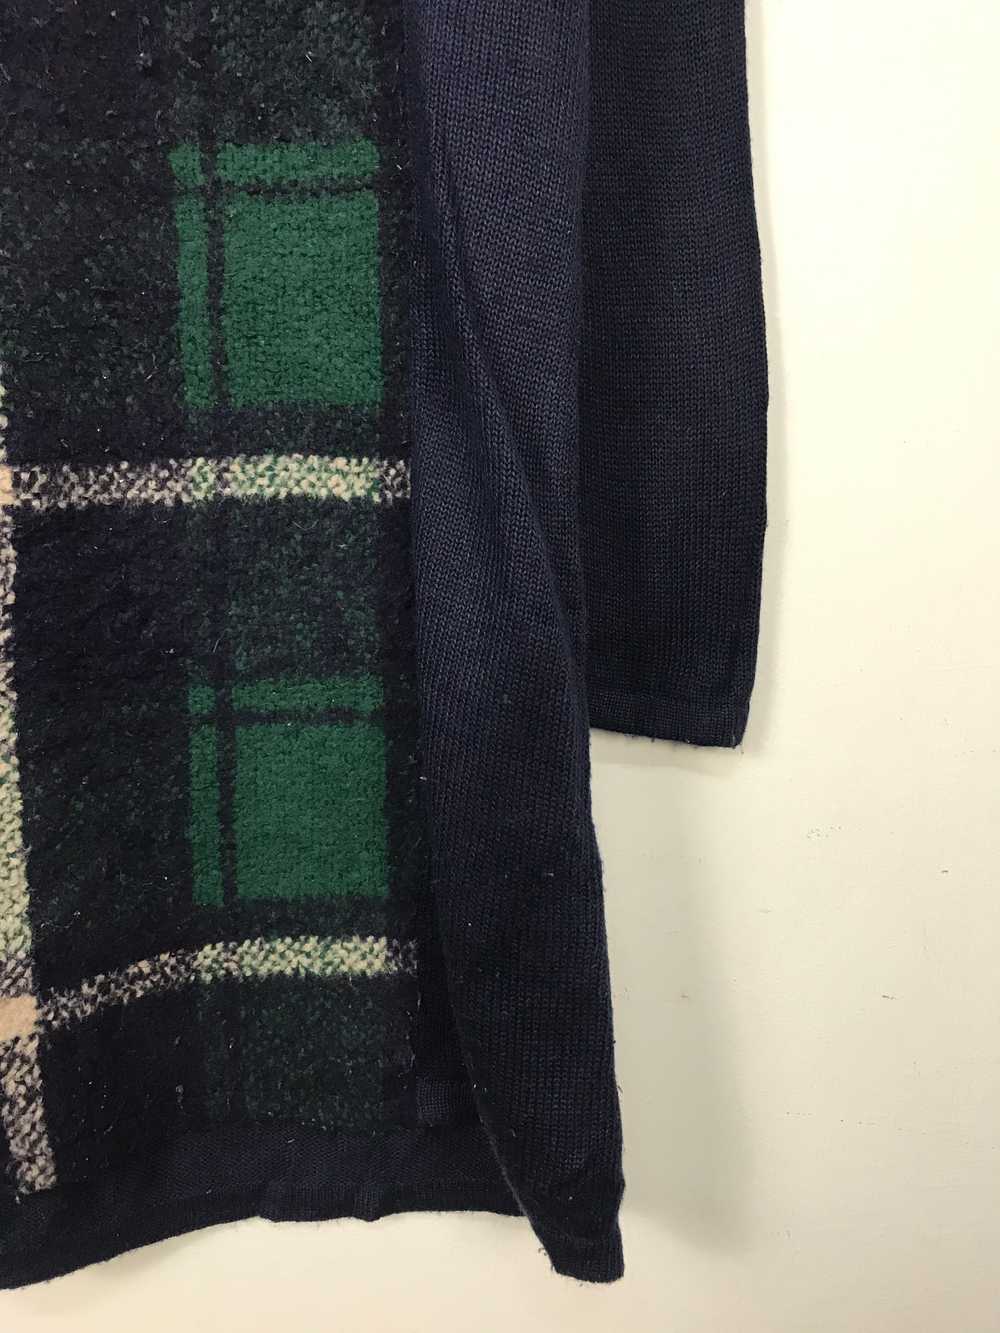 Japanese Brand - Another Brand Burberry Checkered… - image 6